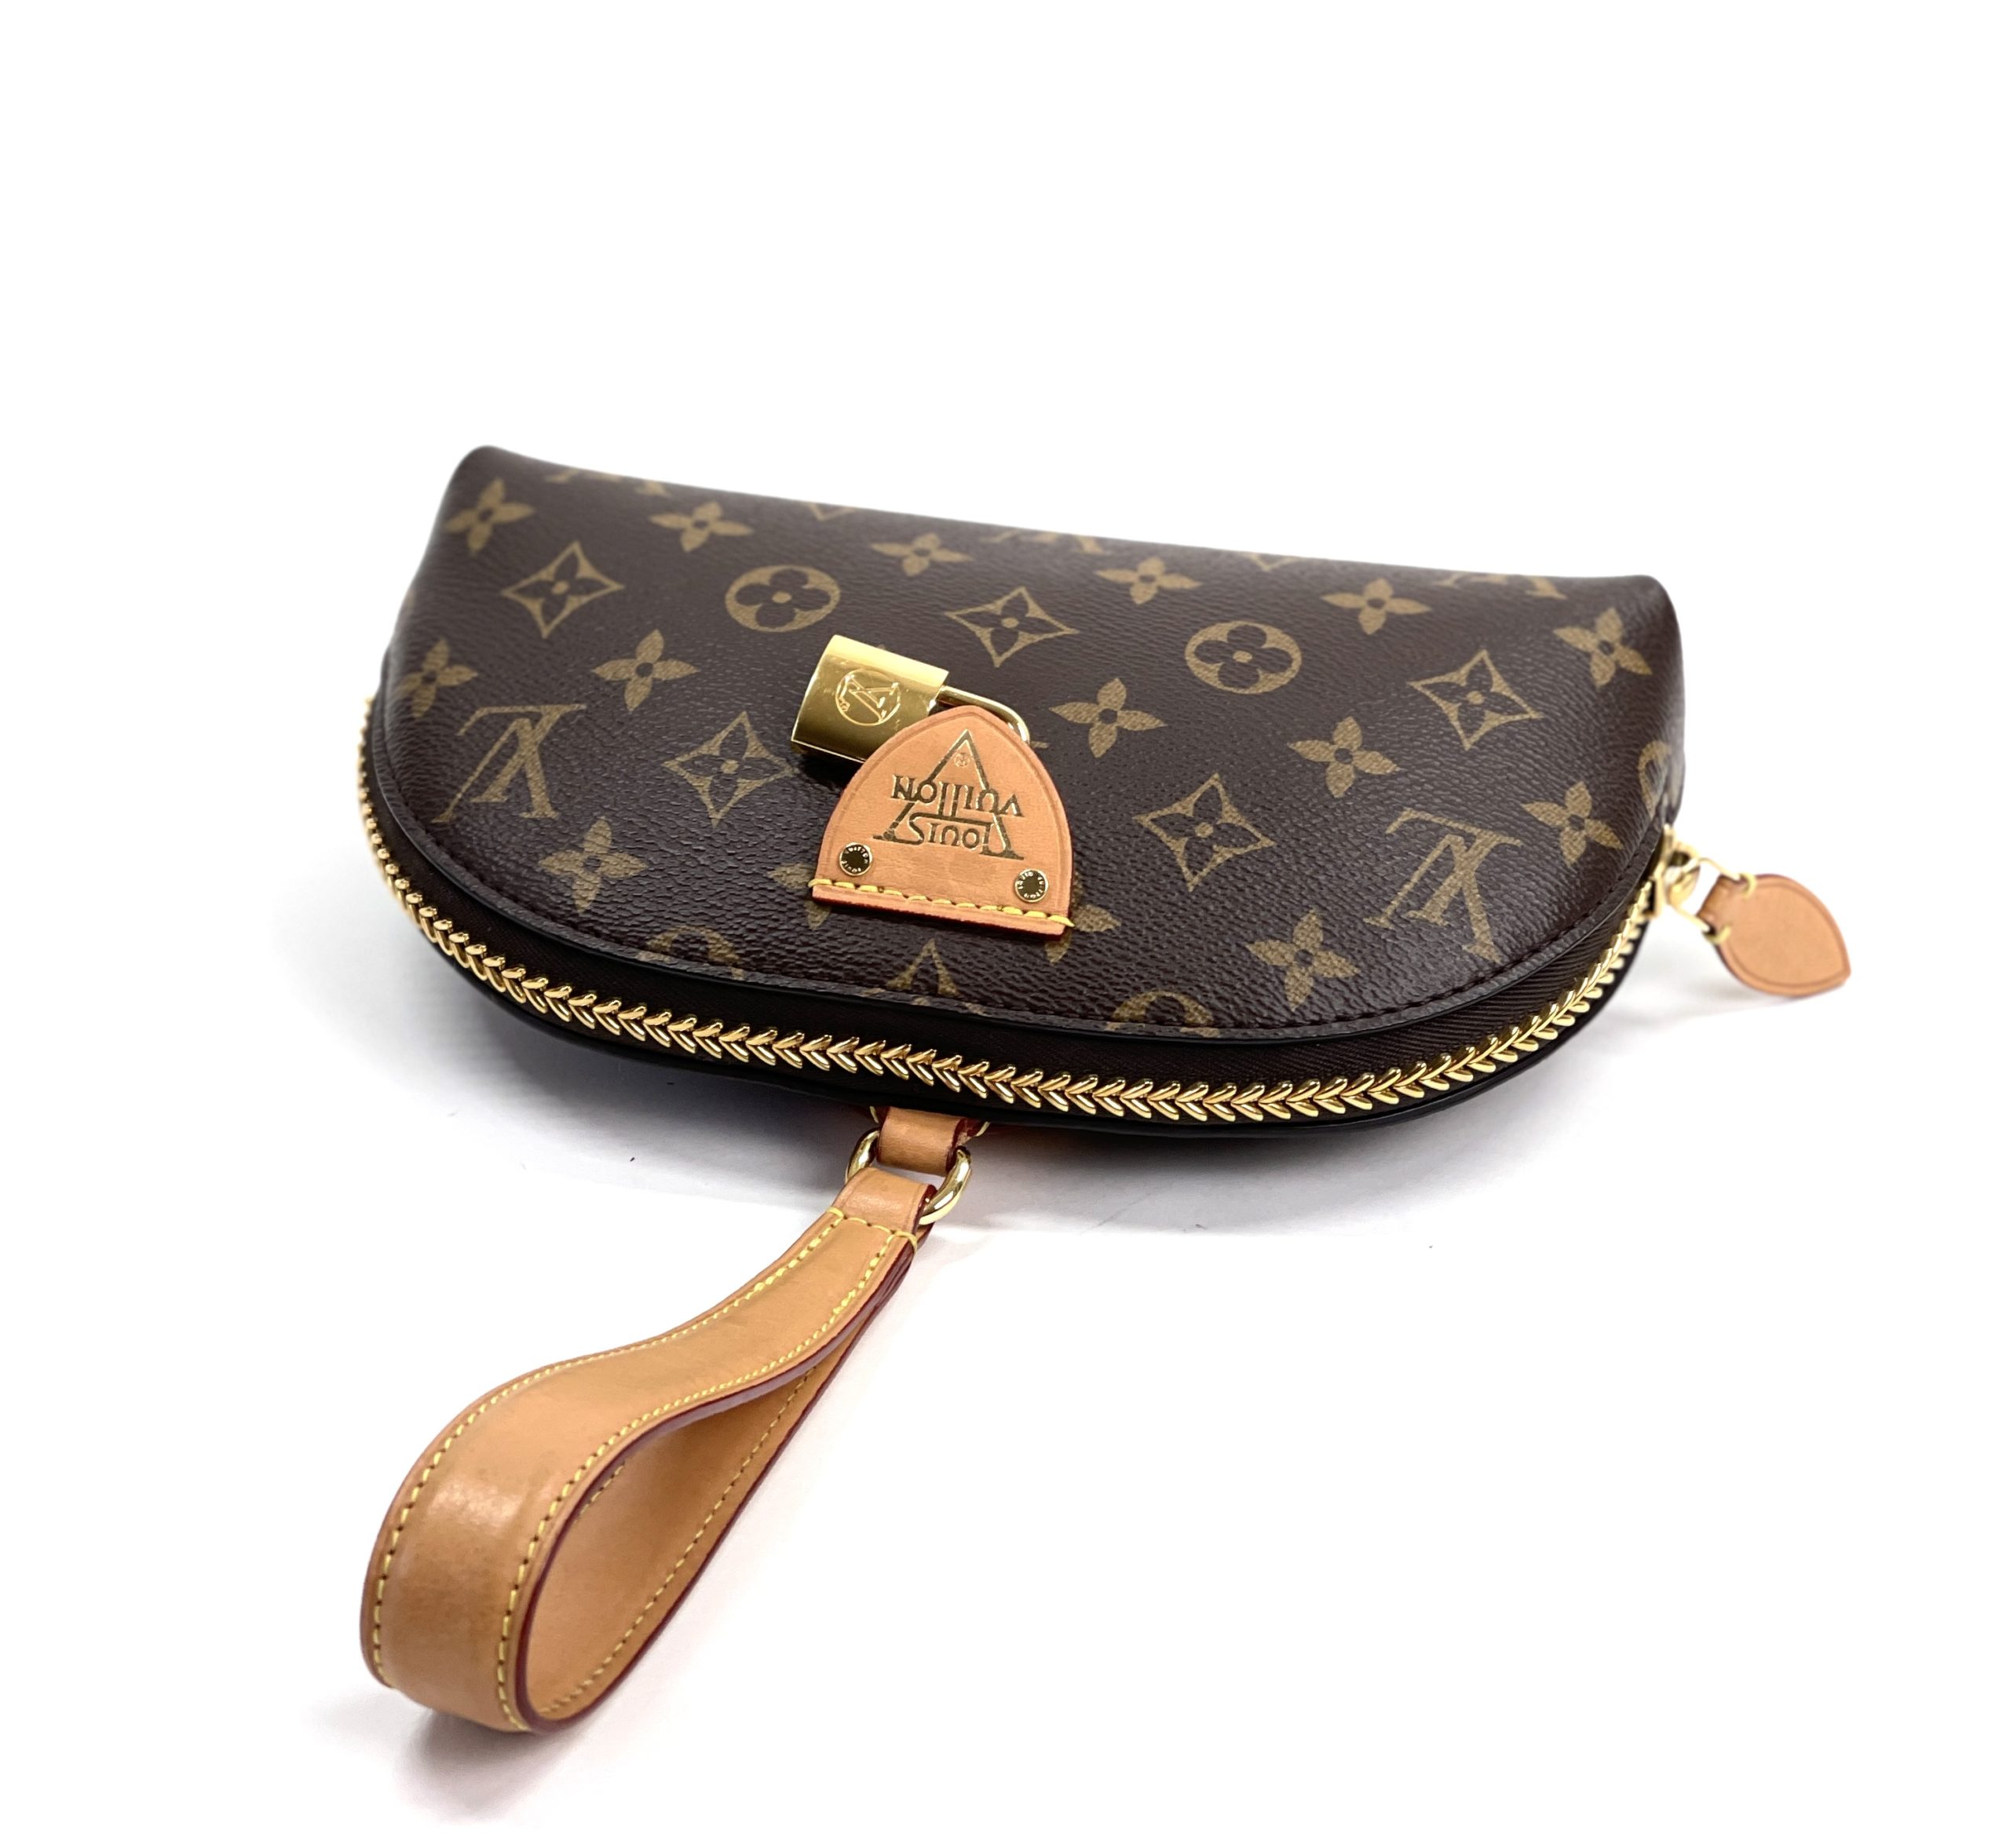 Louis Vuitton Moon Backpack Monogram Brown in Coated Canvas with